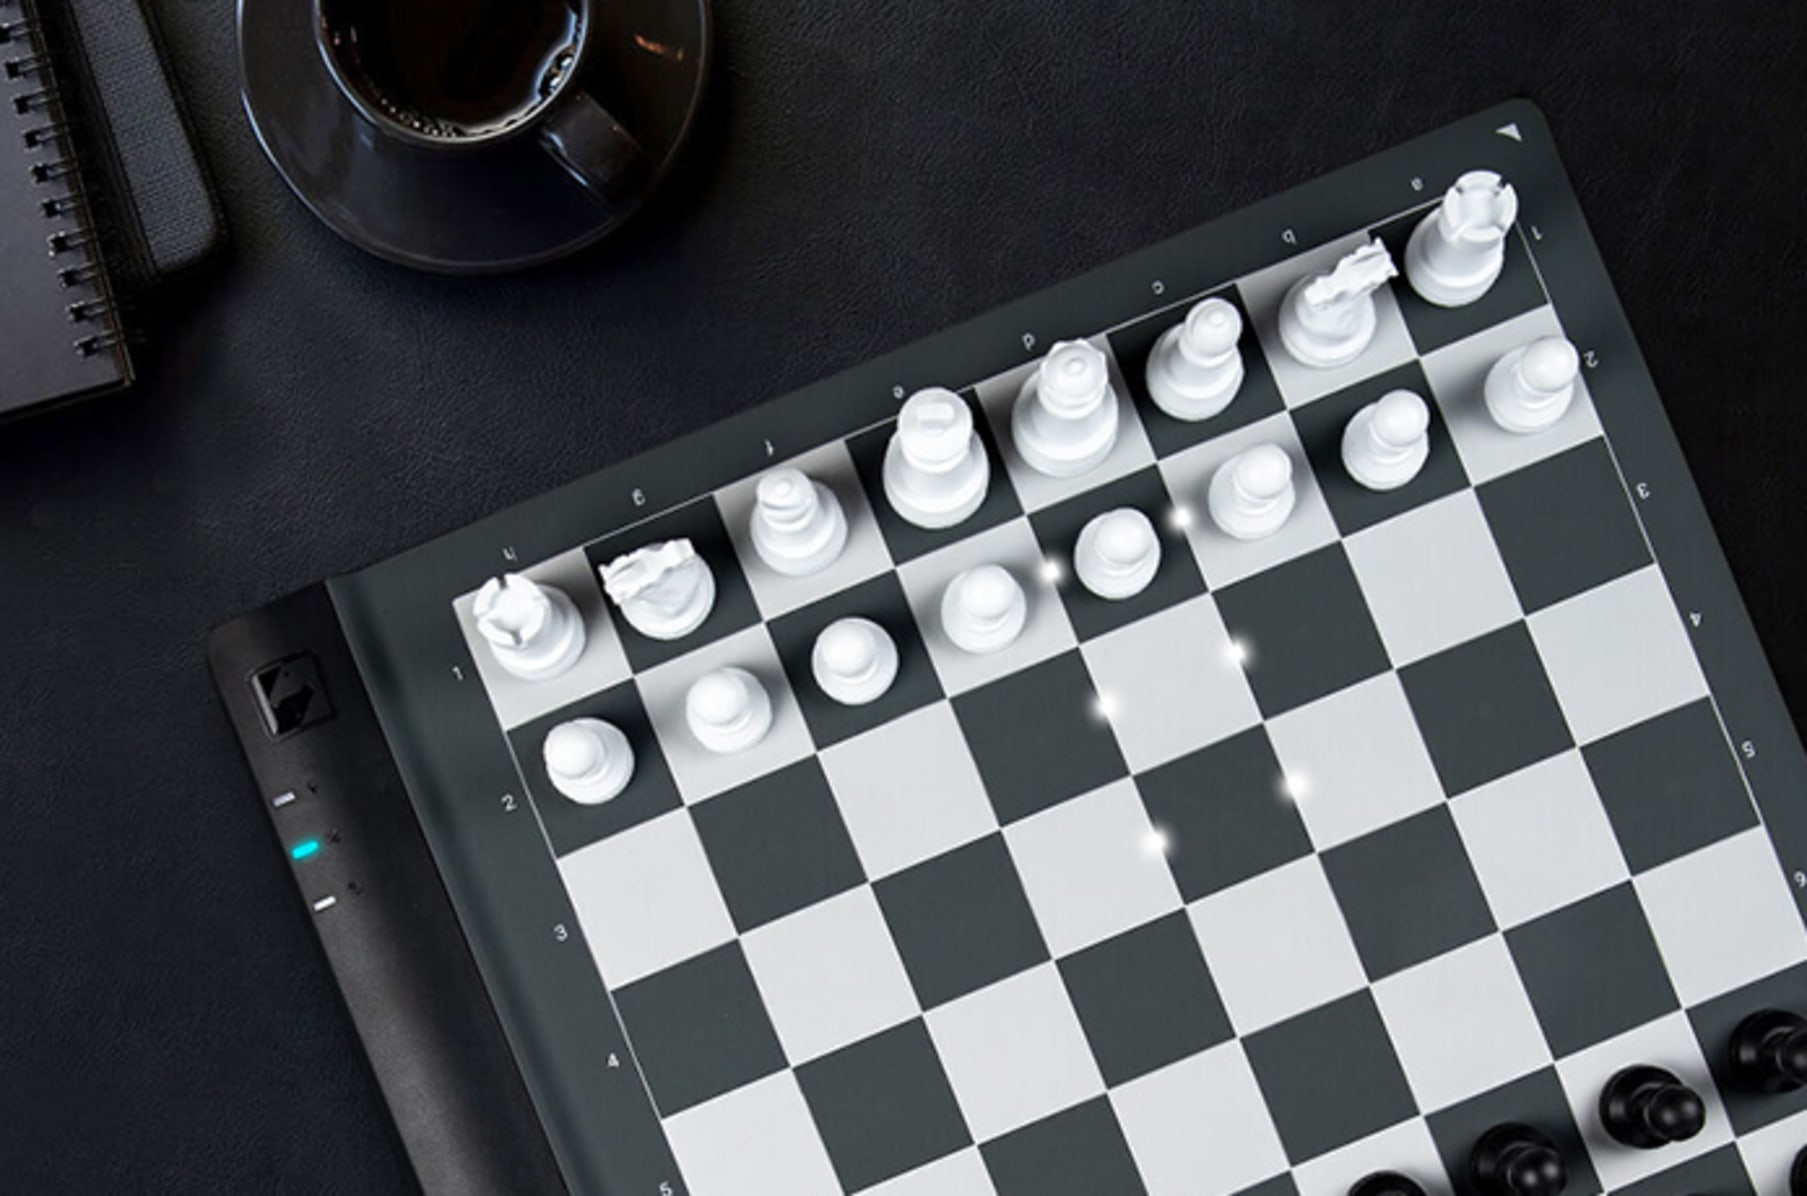 Square Off Pro Electronic Chess Board for Adults & Kids | AI-Powered &  Digital | Play Against AI or Friends | Portable & Rollable Computer Chess  Board